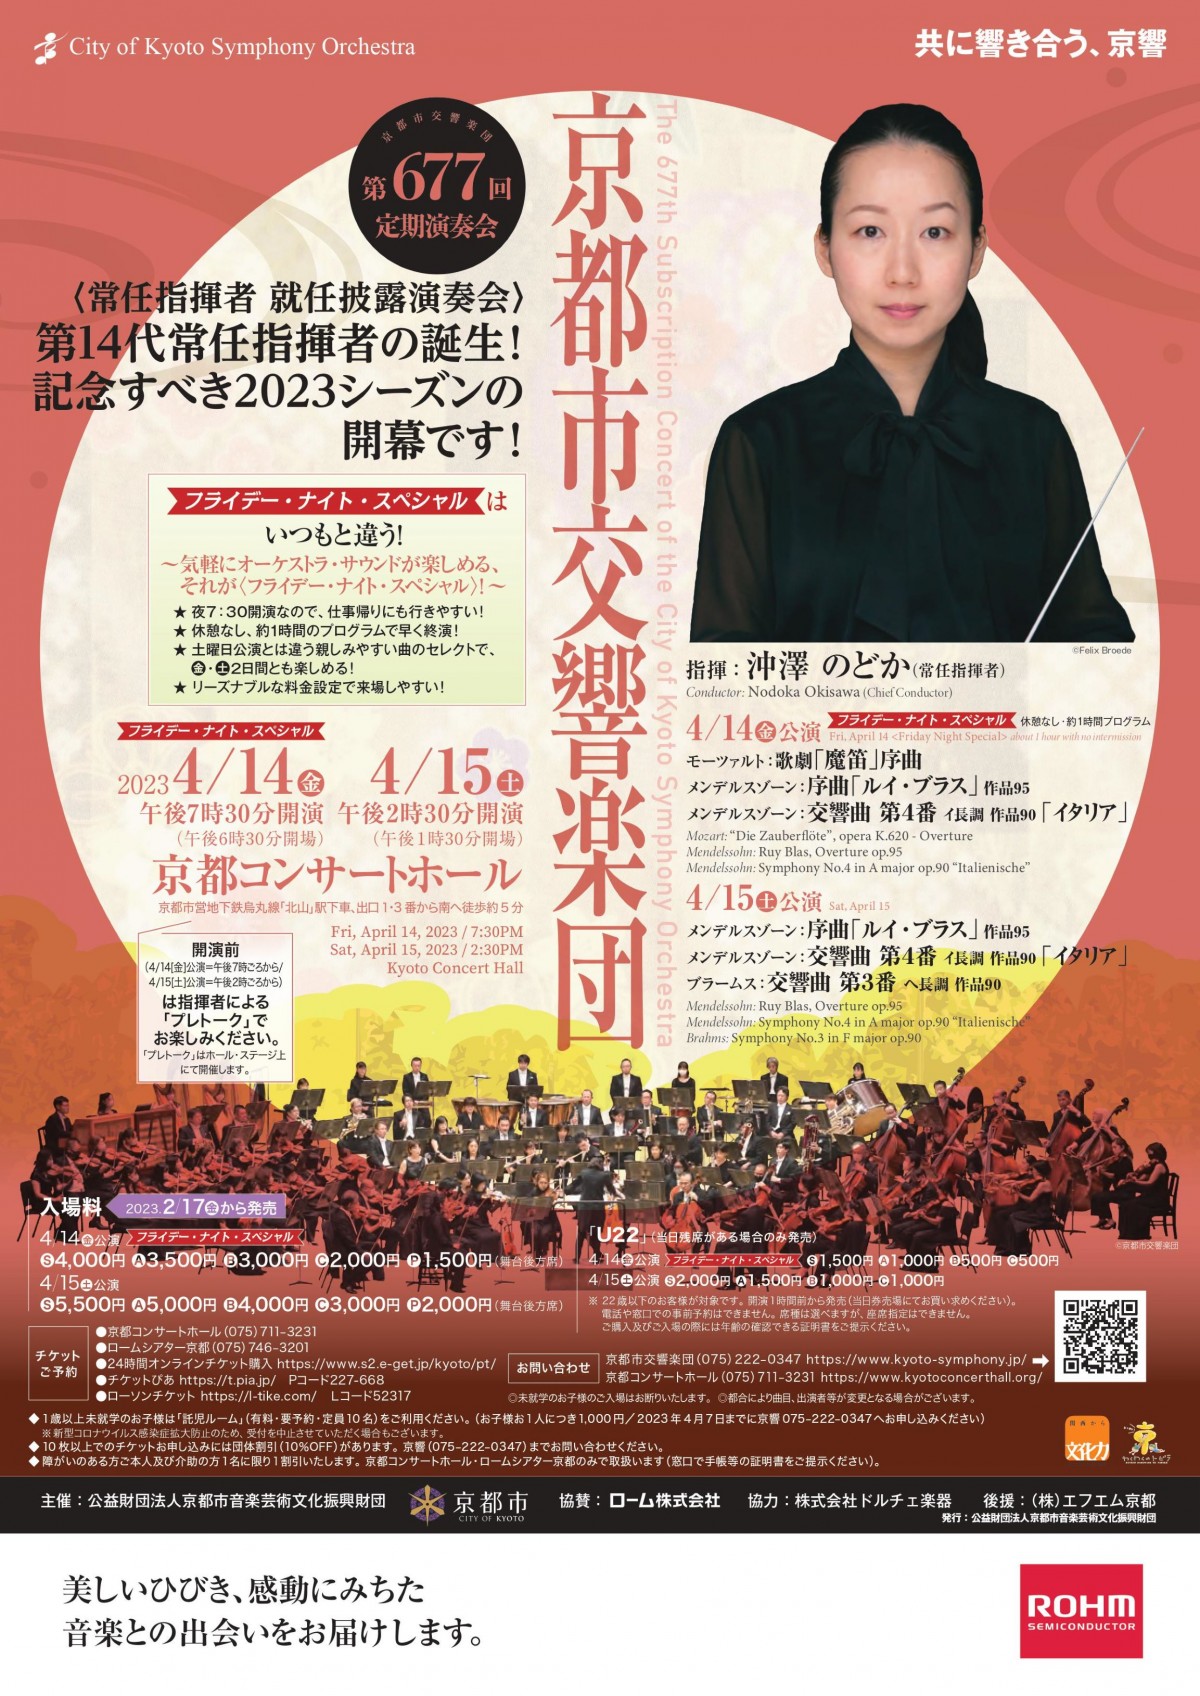 ＜SOLD OUT !＞
The 677th Subscription Concert